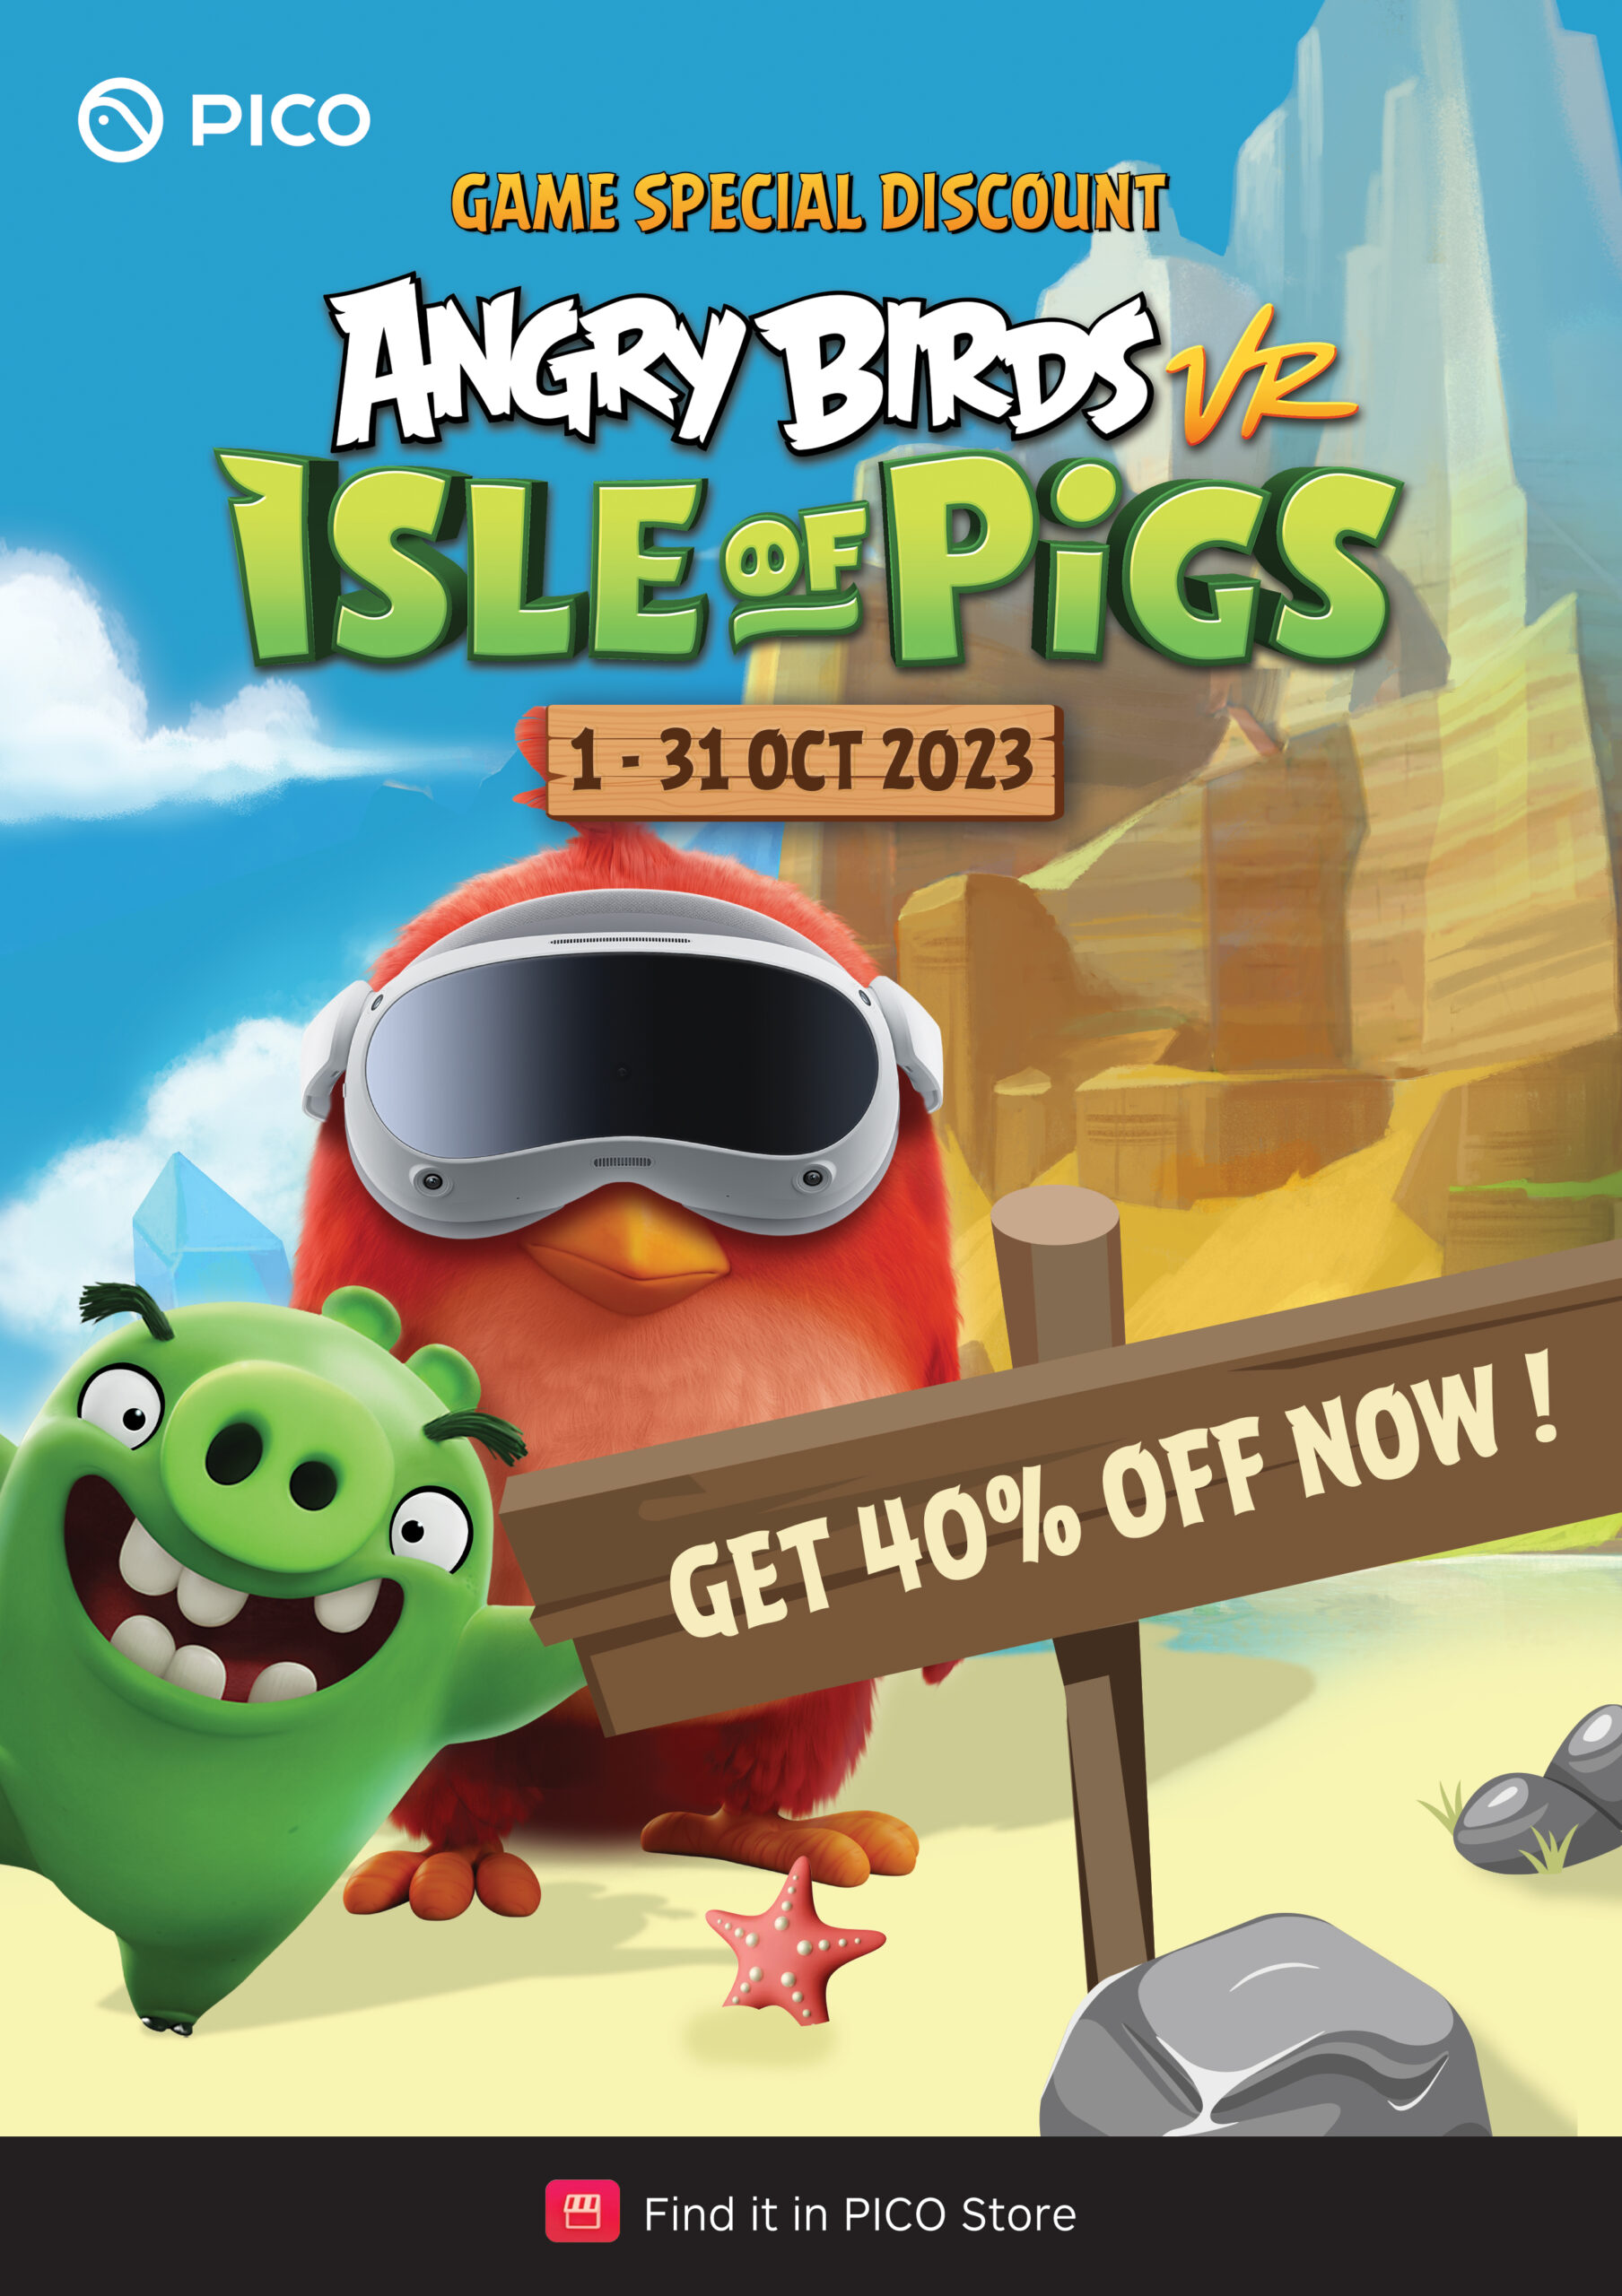 《Angry Birds VR: Isle of Pigs》